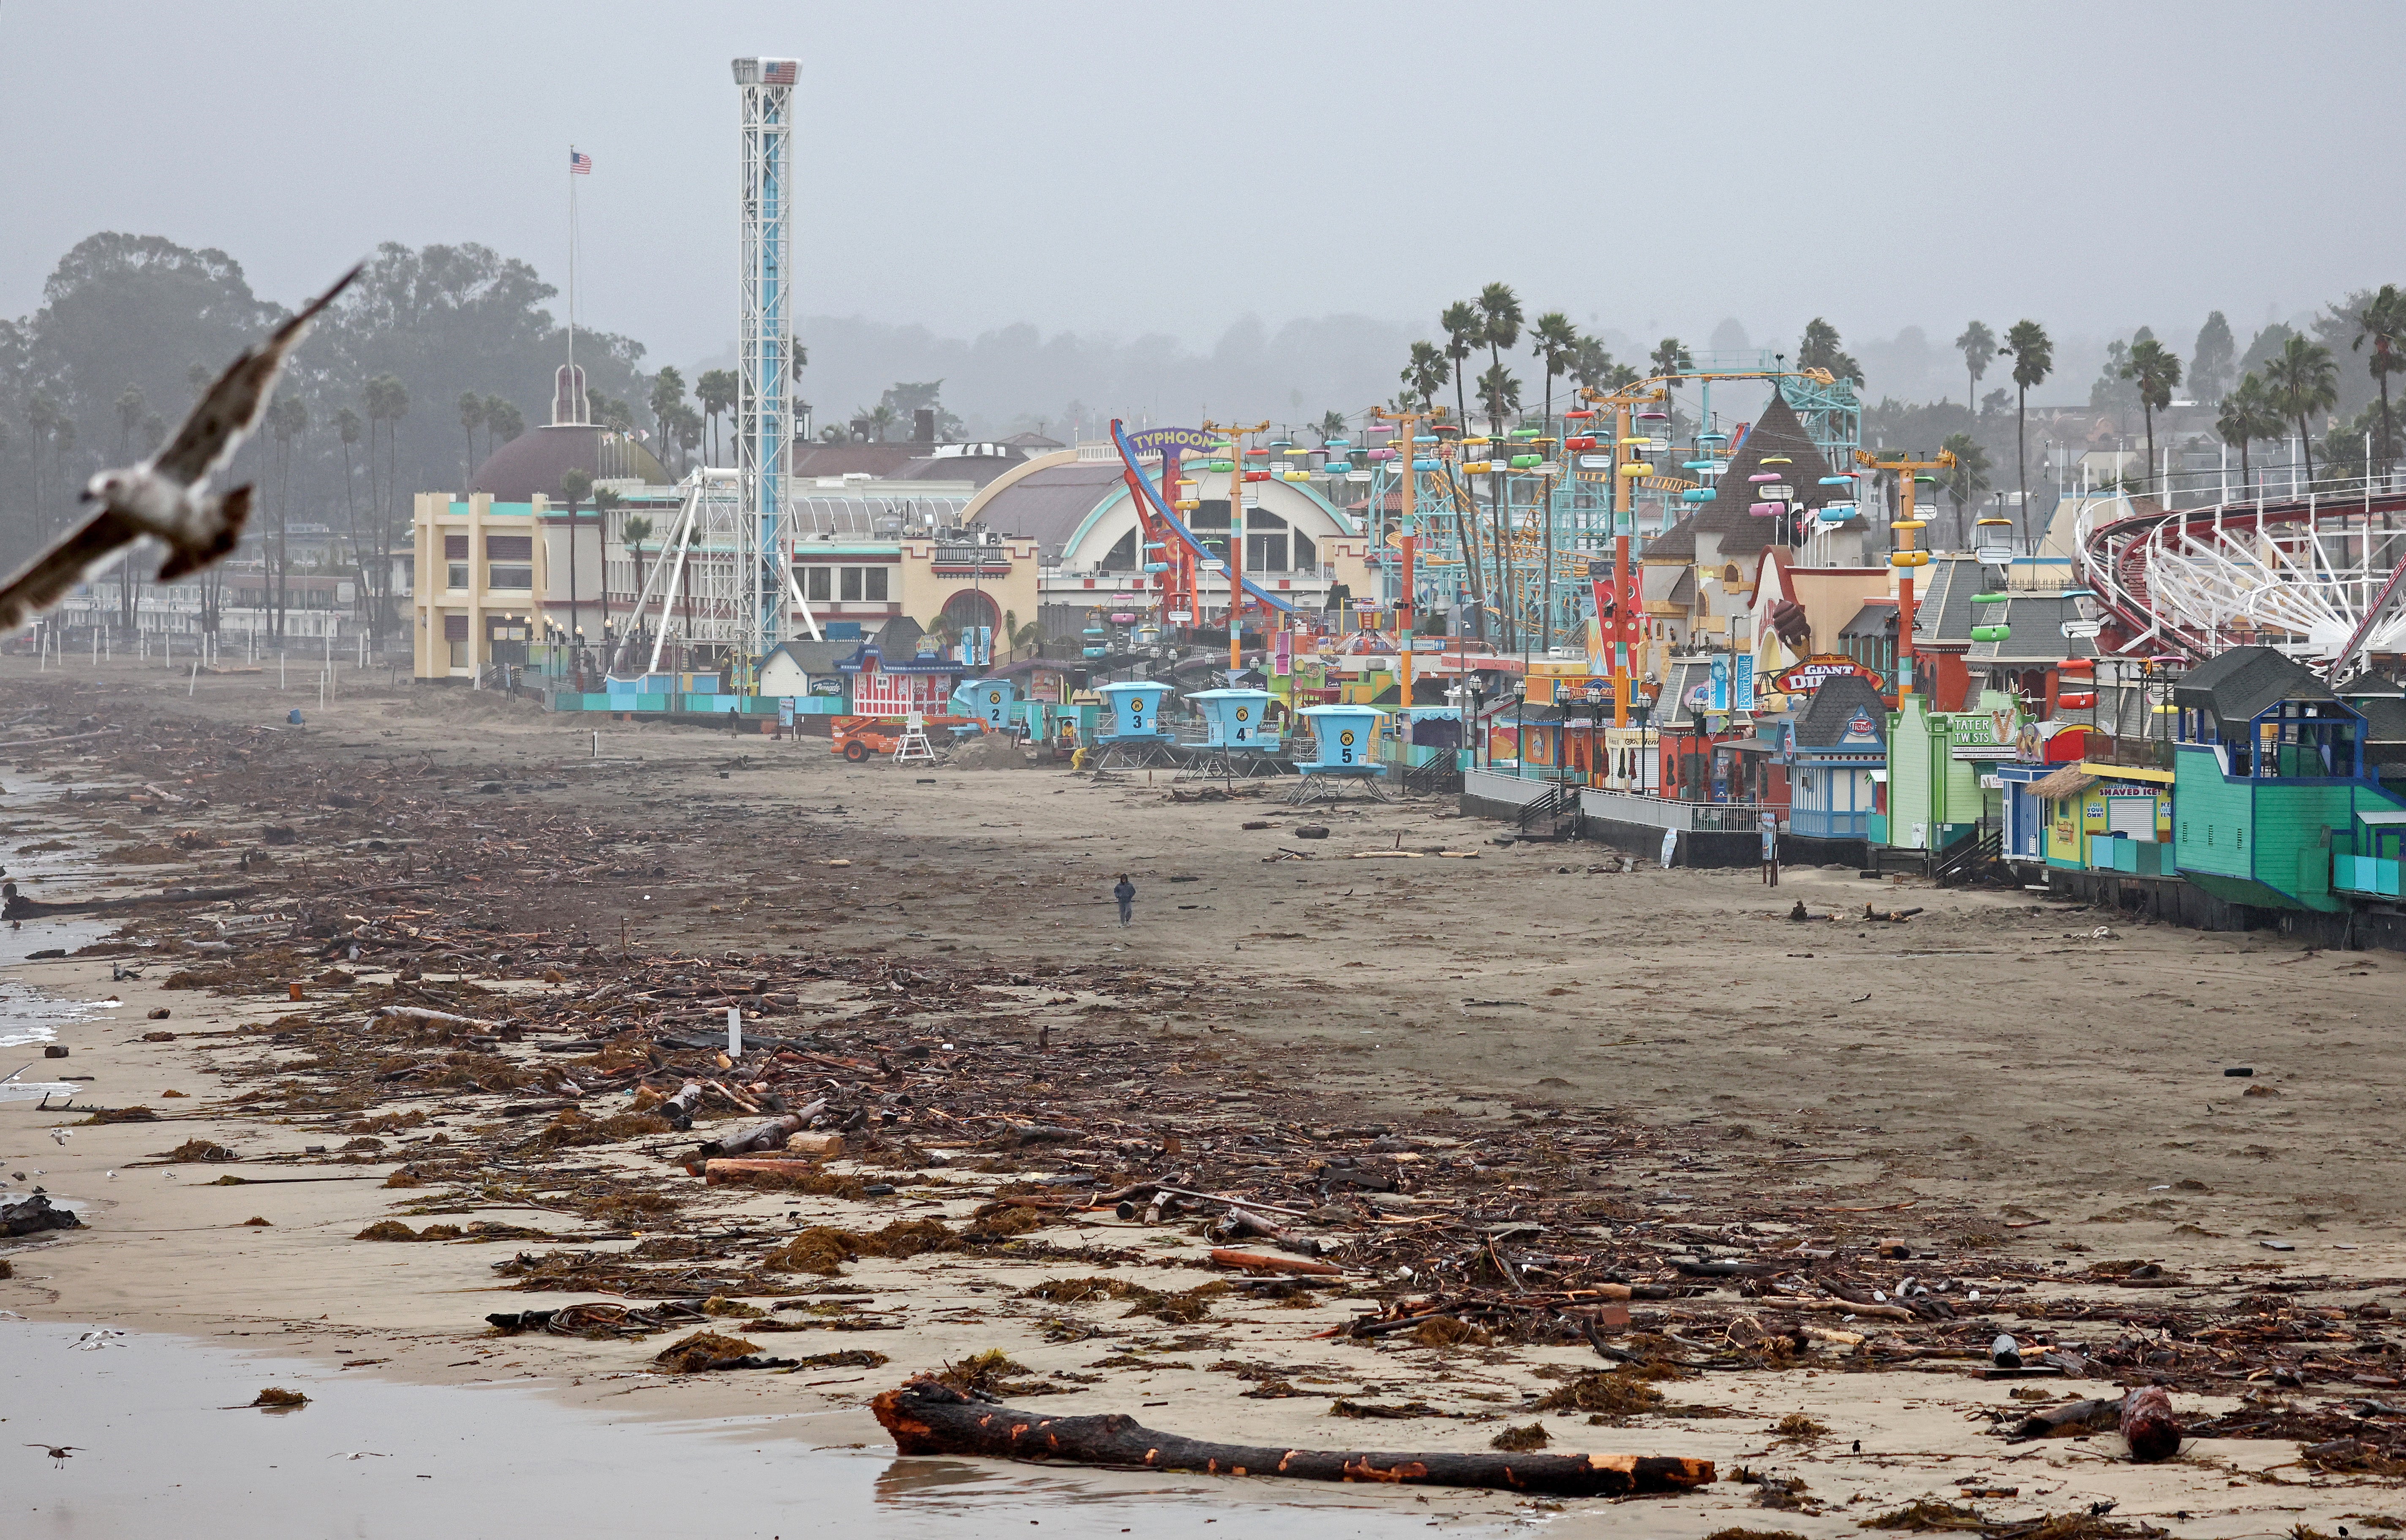 A lone person walks near driftwood storm debris washed up in front of the Santa Cruz Beach Boardwalk amusement park on January 11